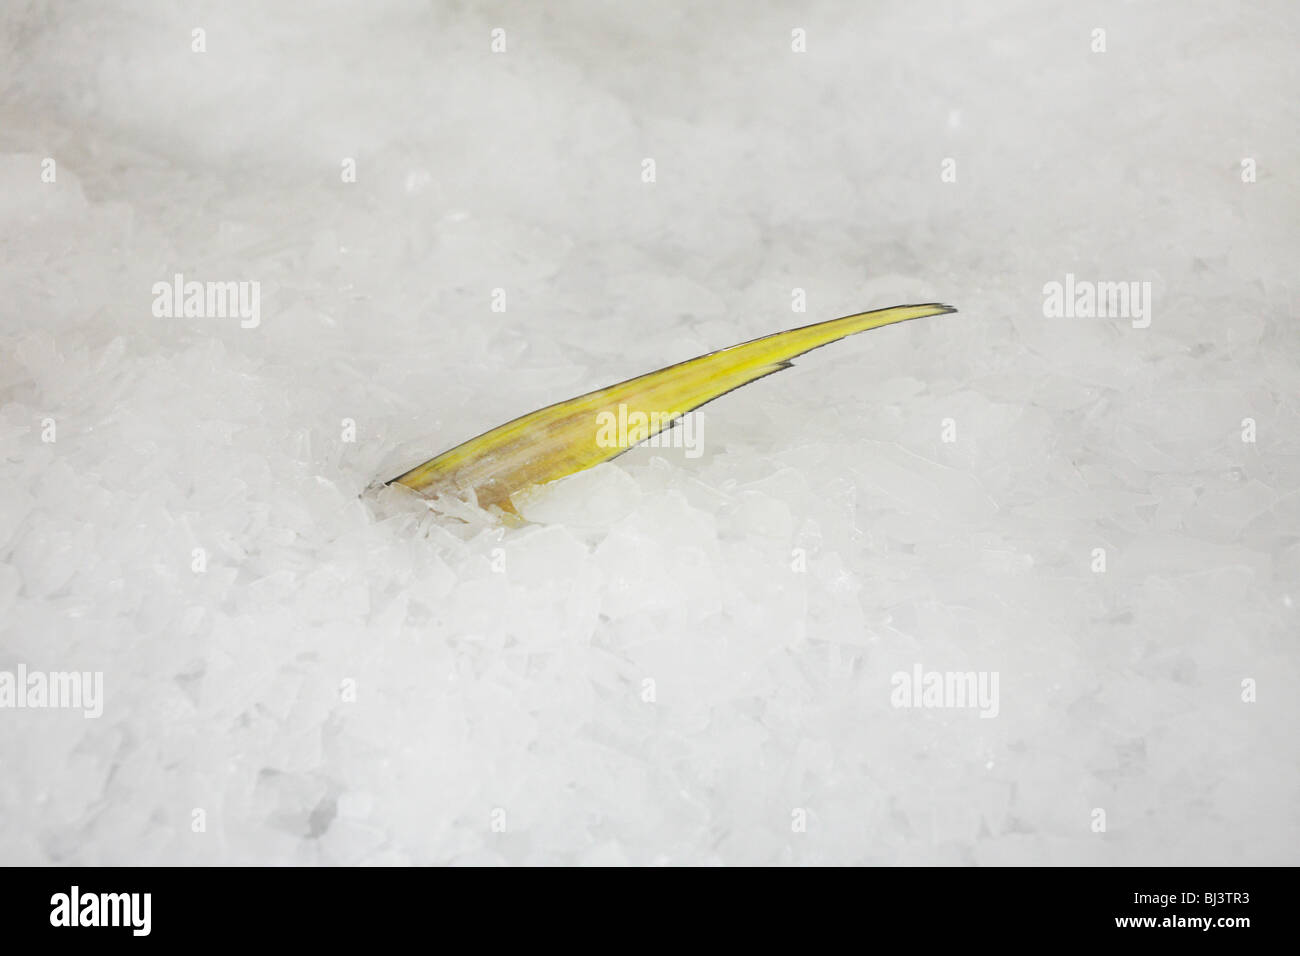 A tuna fish's sharp yellow fin protrudes from shredded ice at the Cyprea Marine Foods processing factory, Maldives. Stock Photo